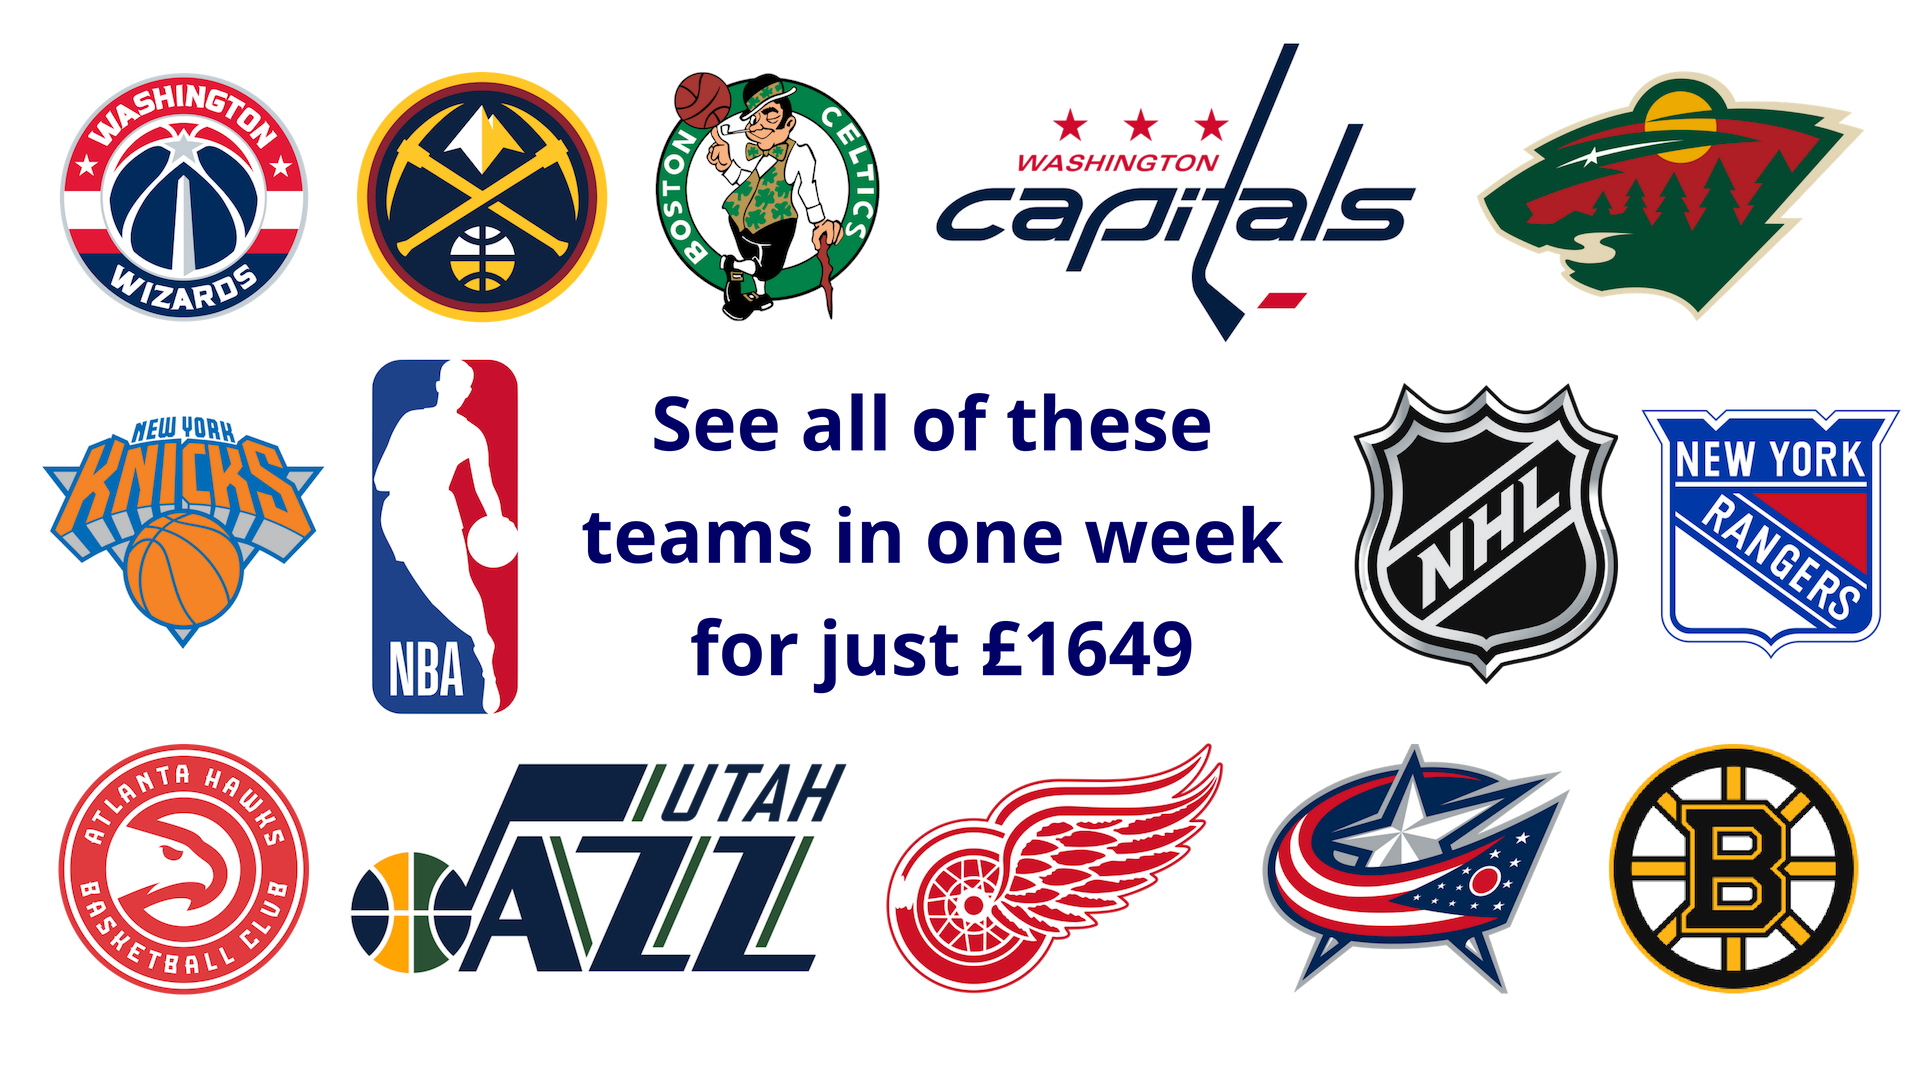 copy-of-see-all-of-these-teams-in-one-week-for-just-1649-mvp-travel